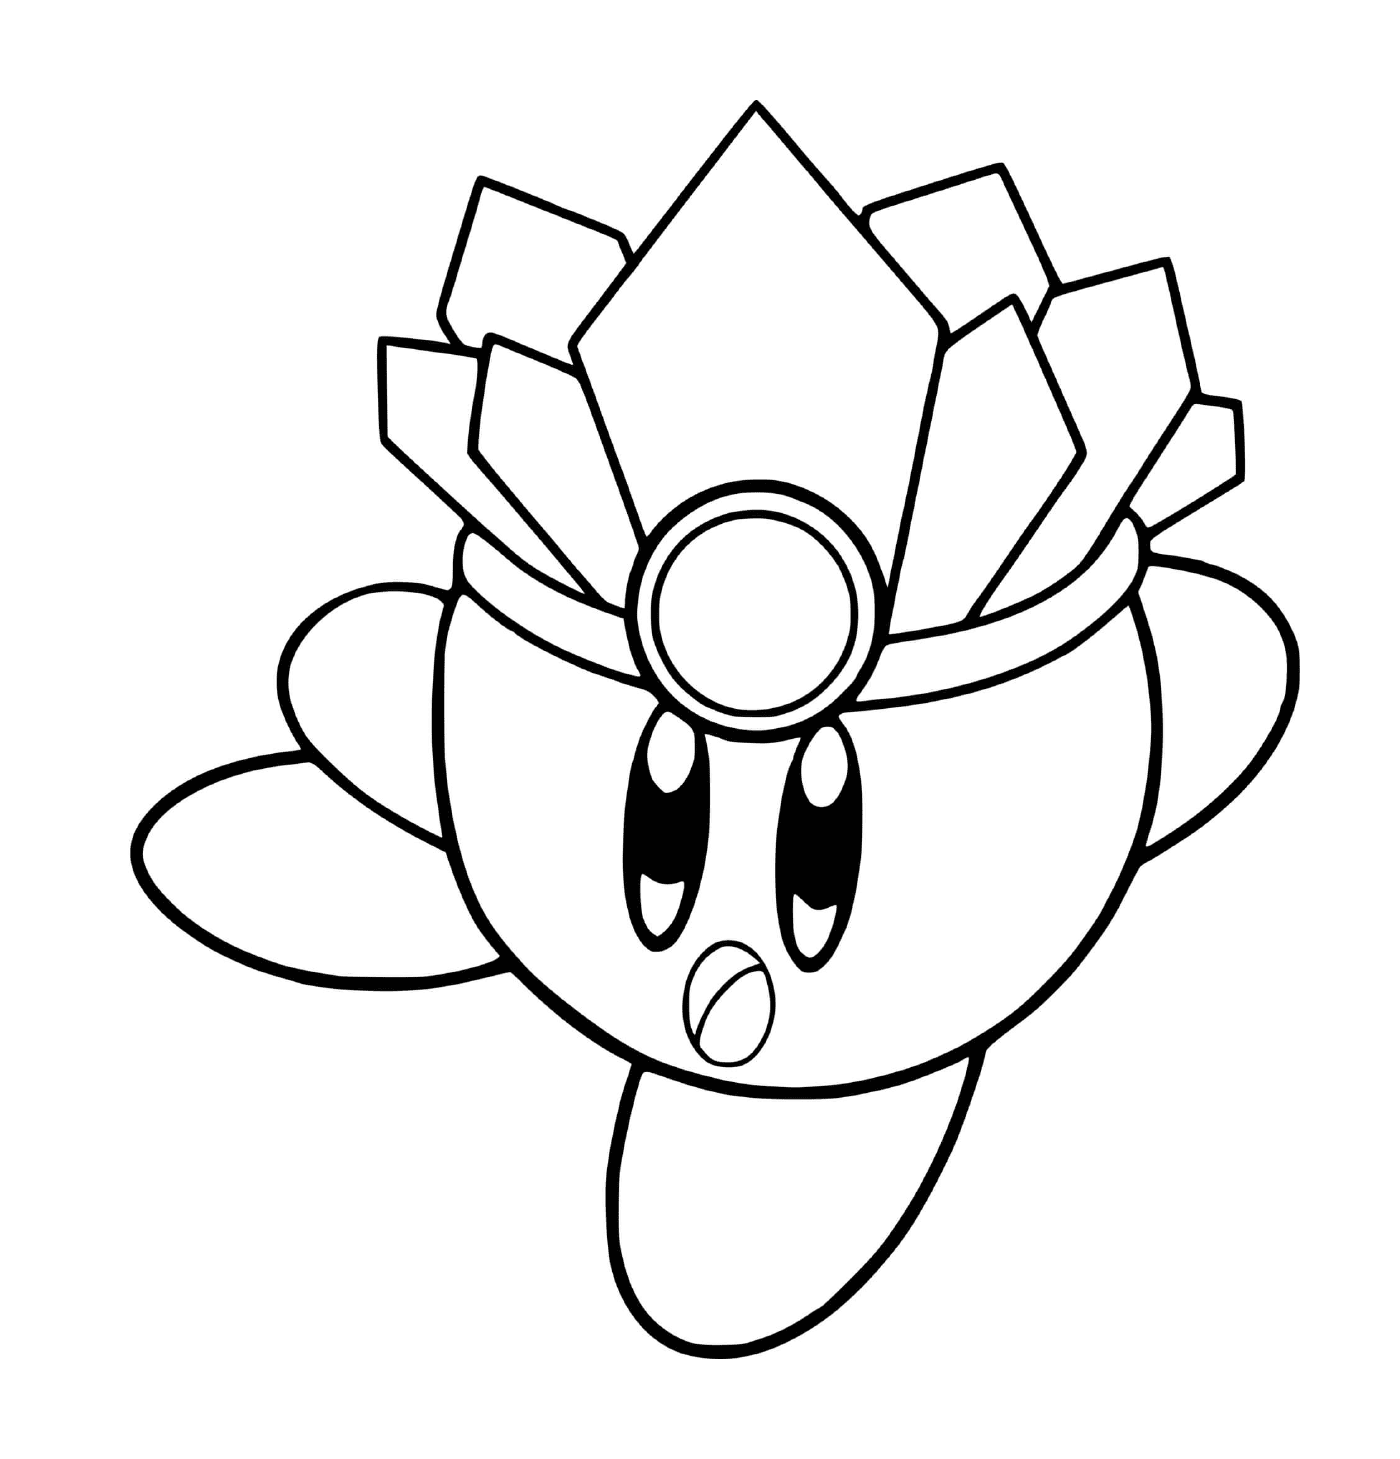  Kirby with a cute crown 